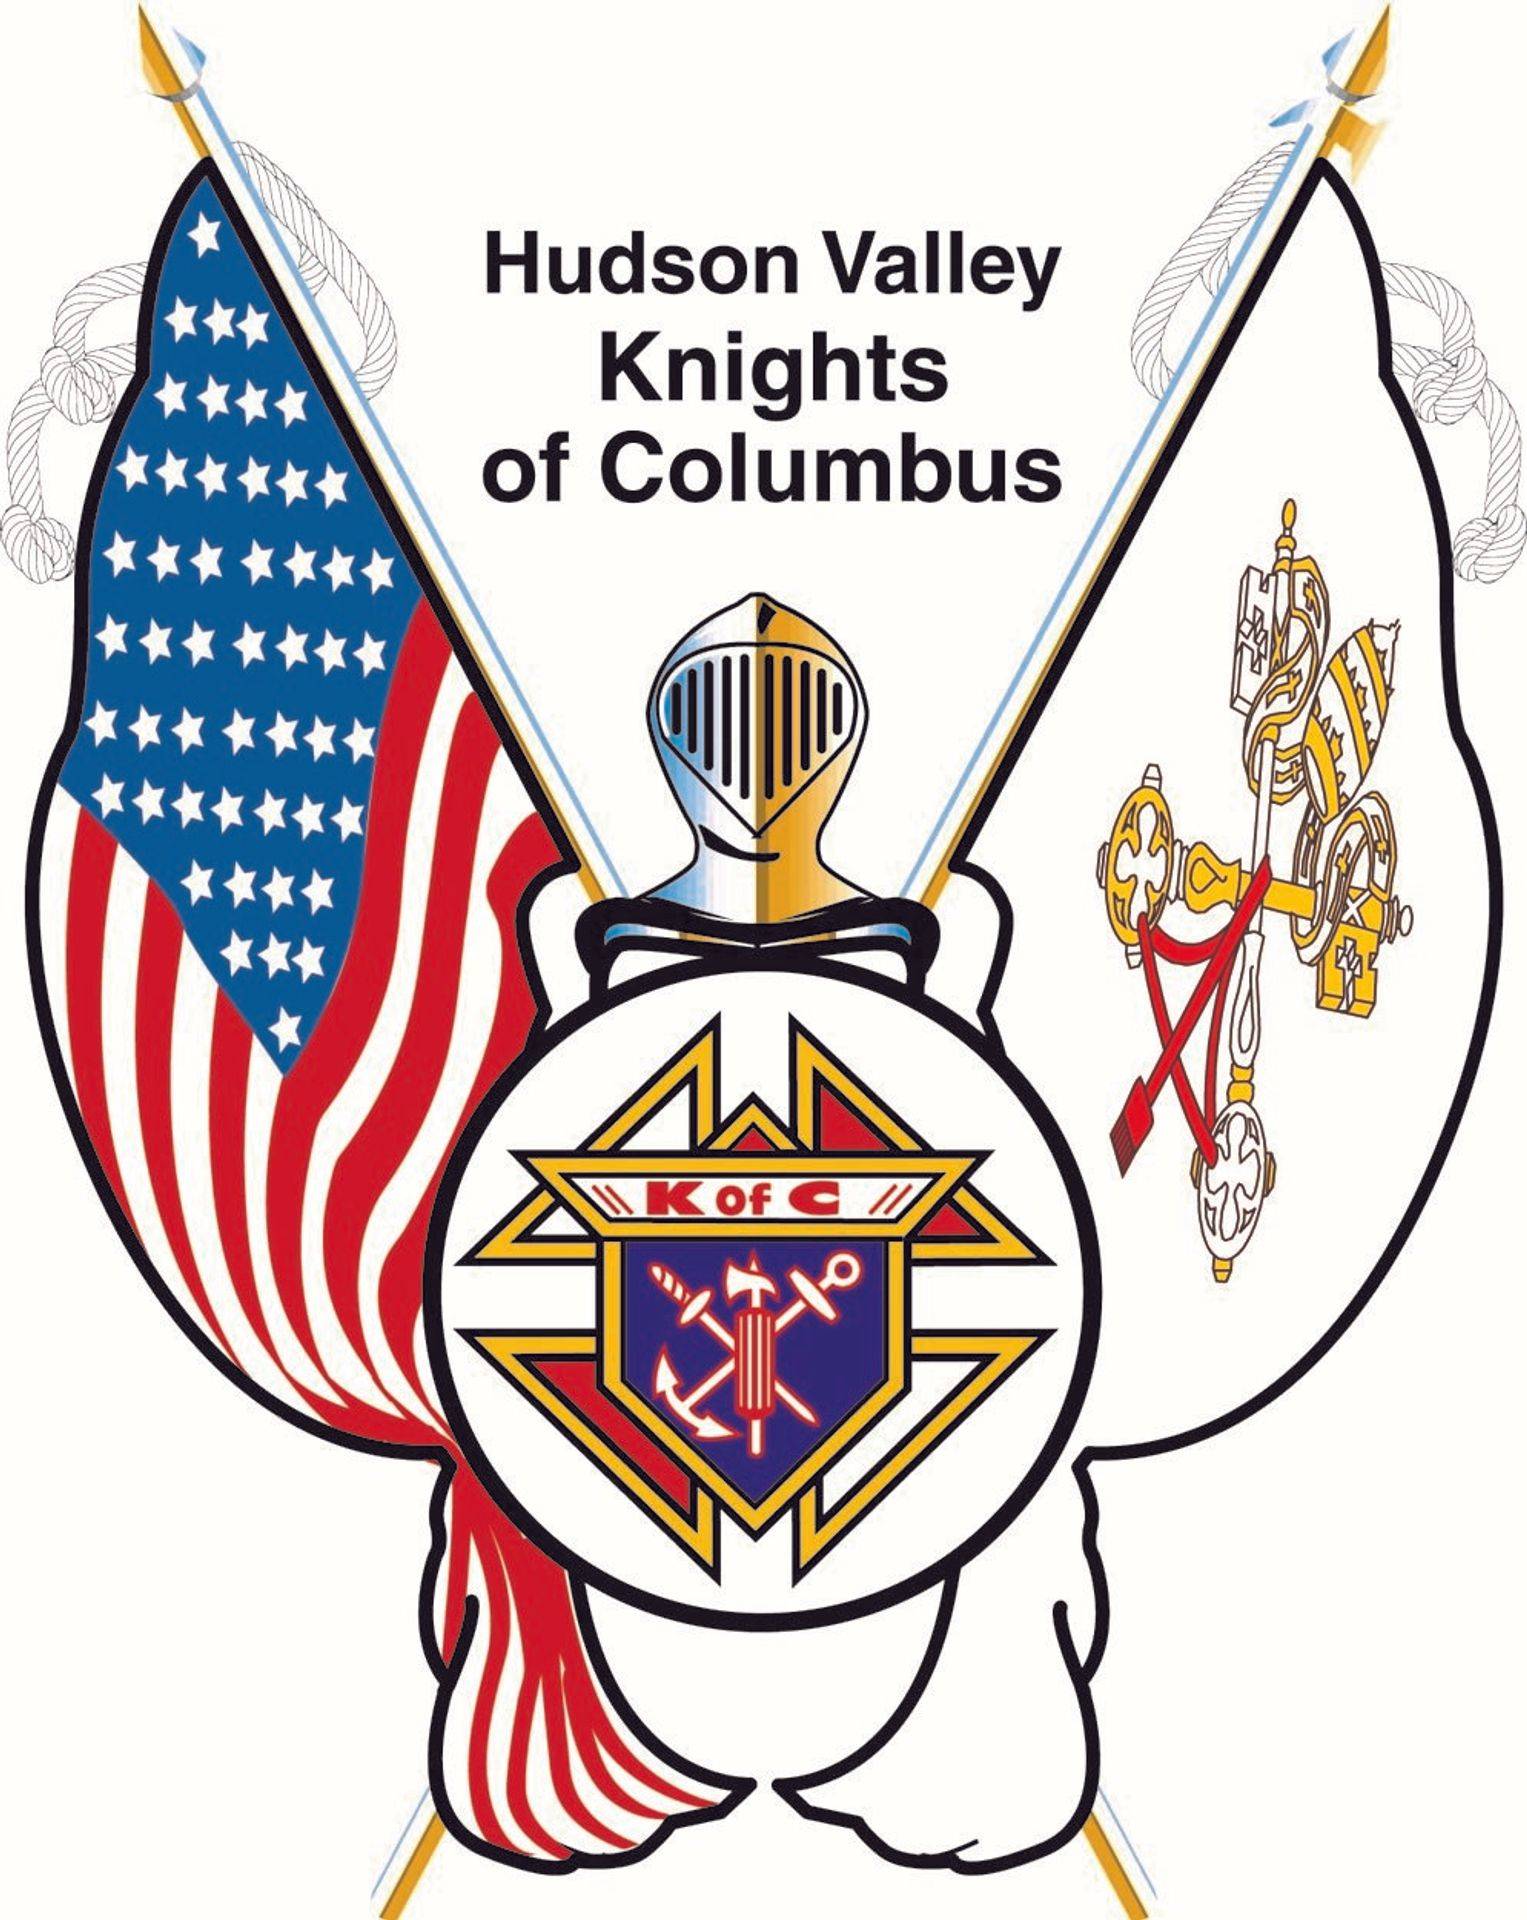 The Hudson Valley Chapter of the Knights of Columbus